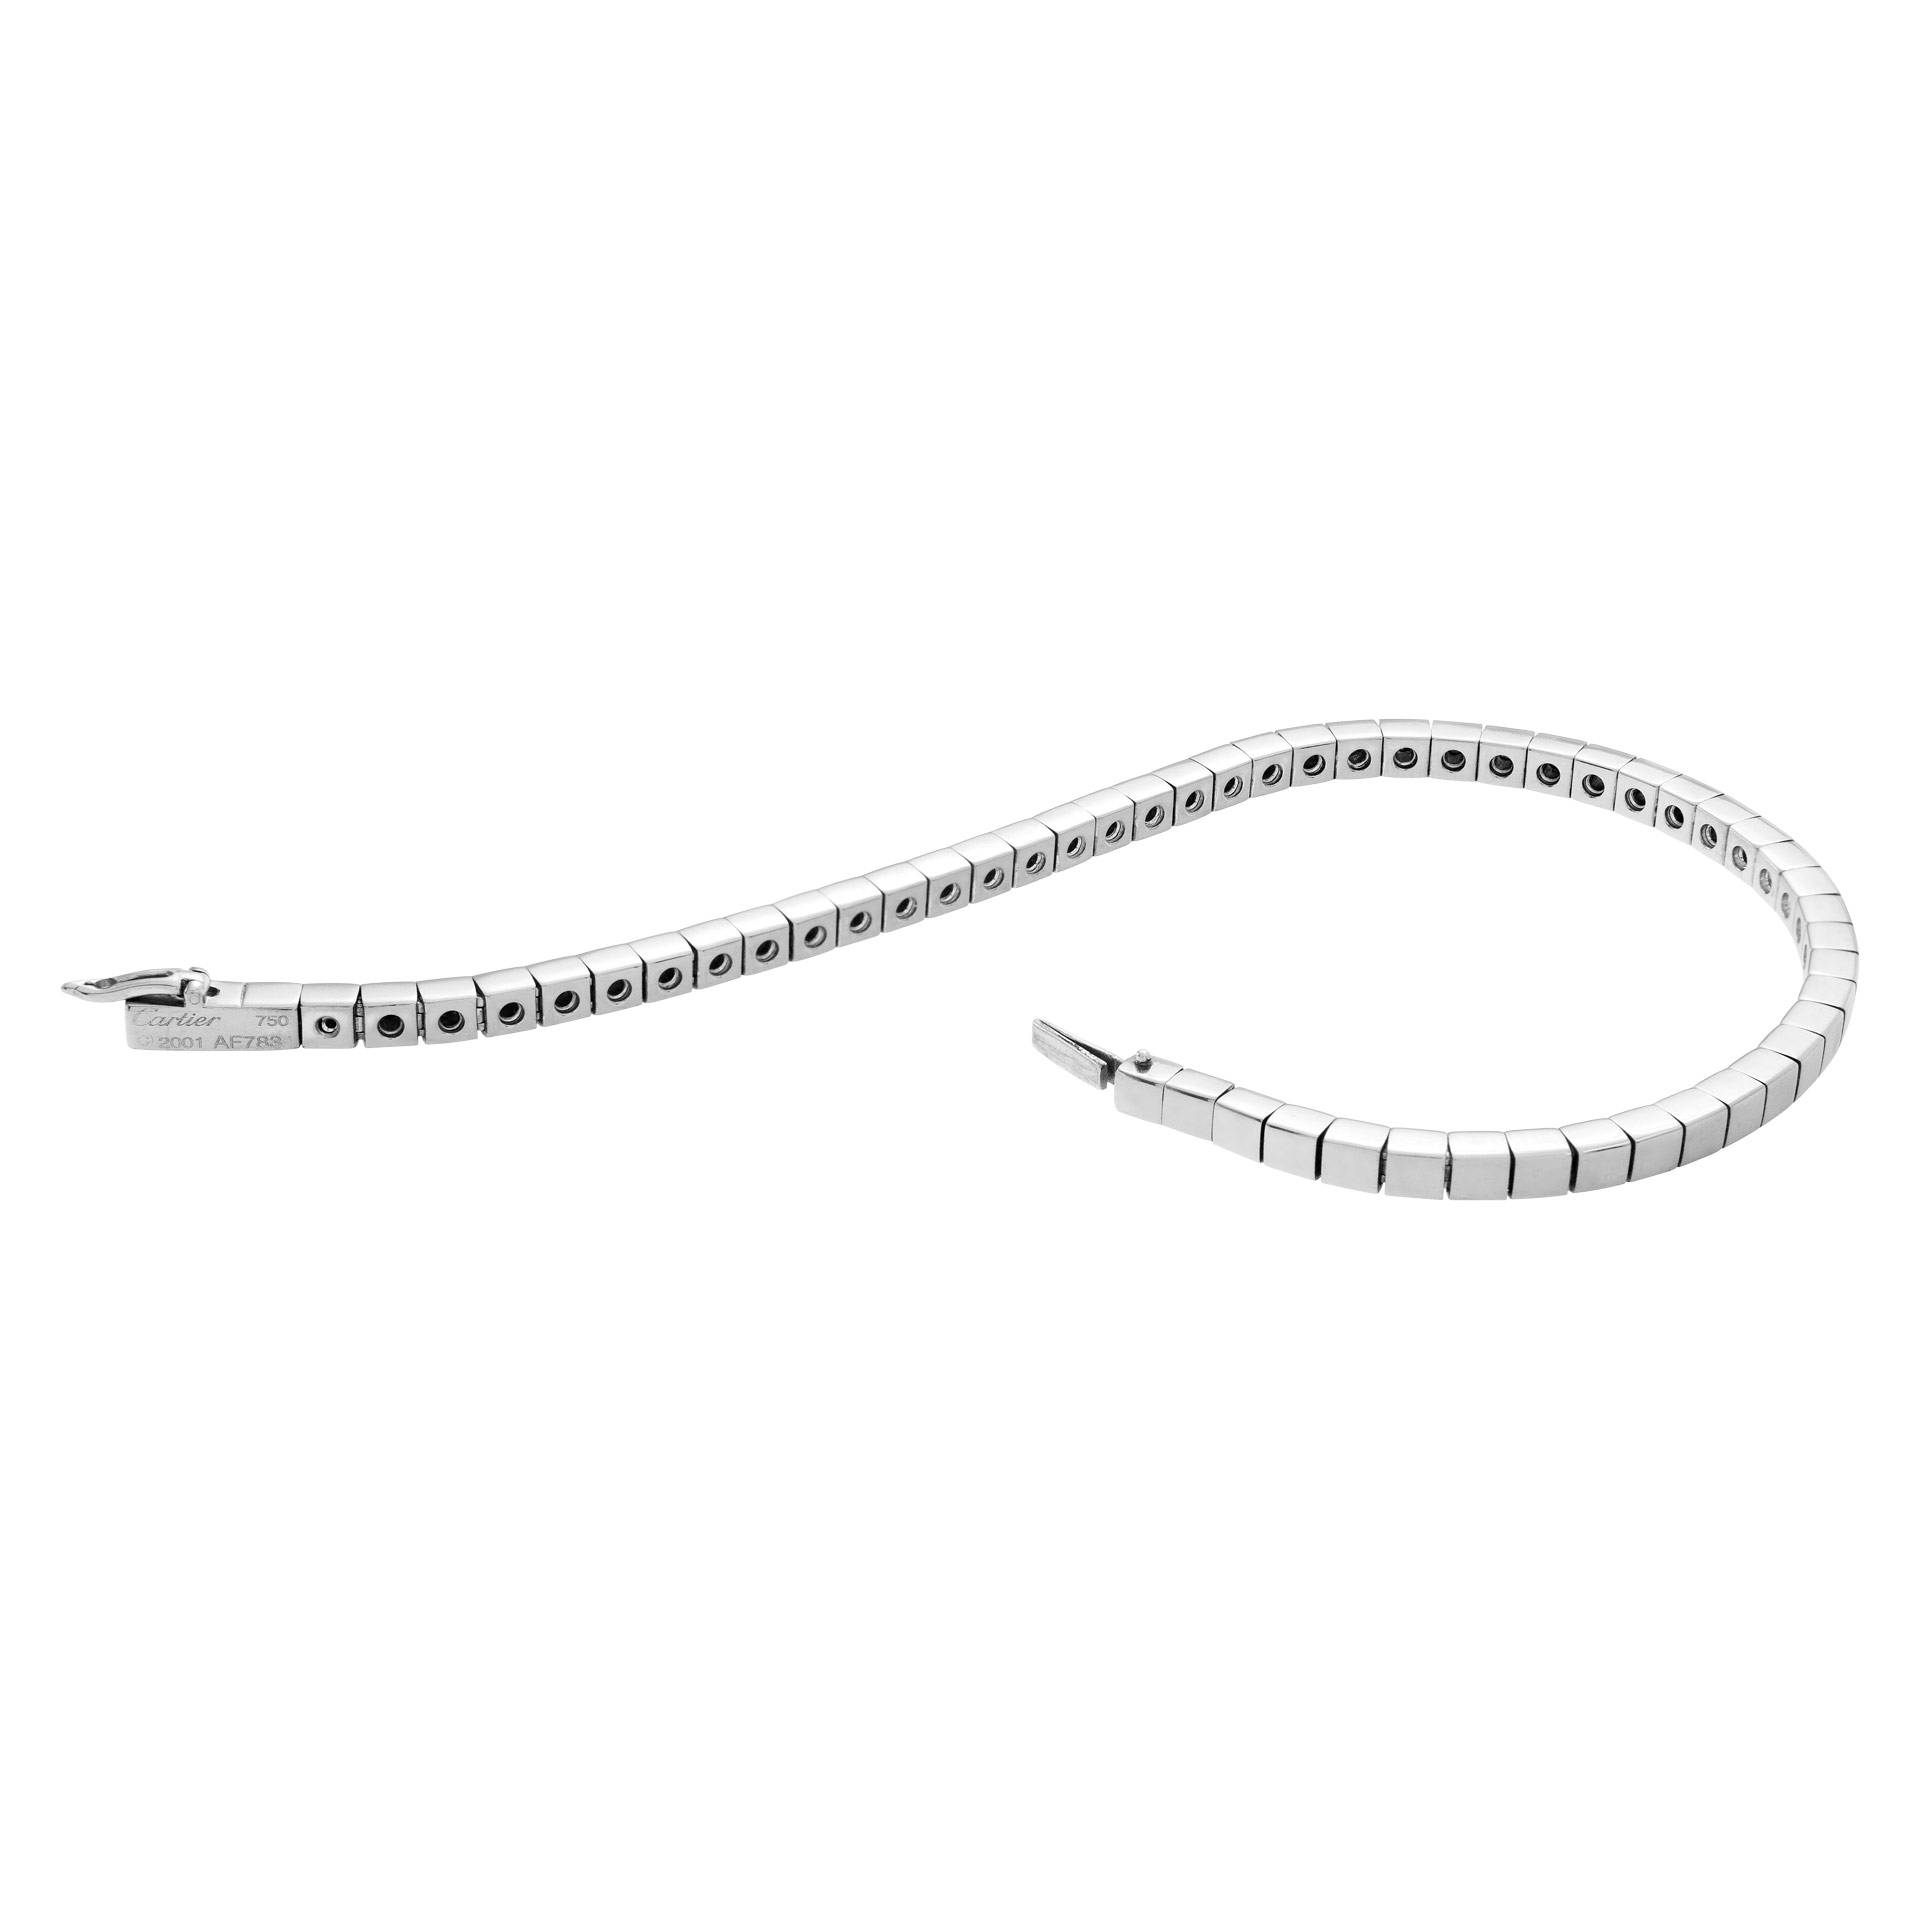 Cartier Lanieres bracelet in 18k white gold. 6.5 inches long. image 3